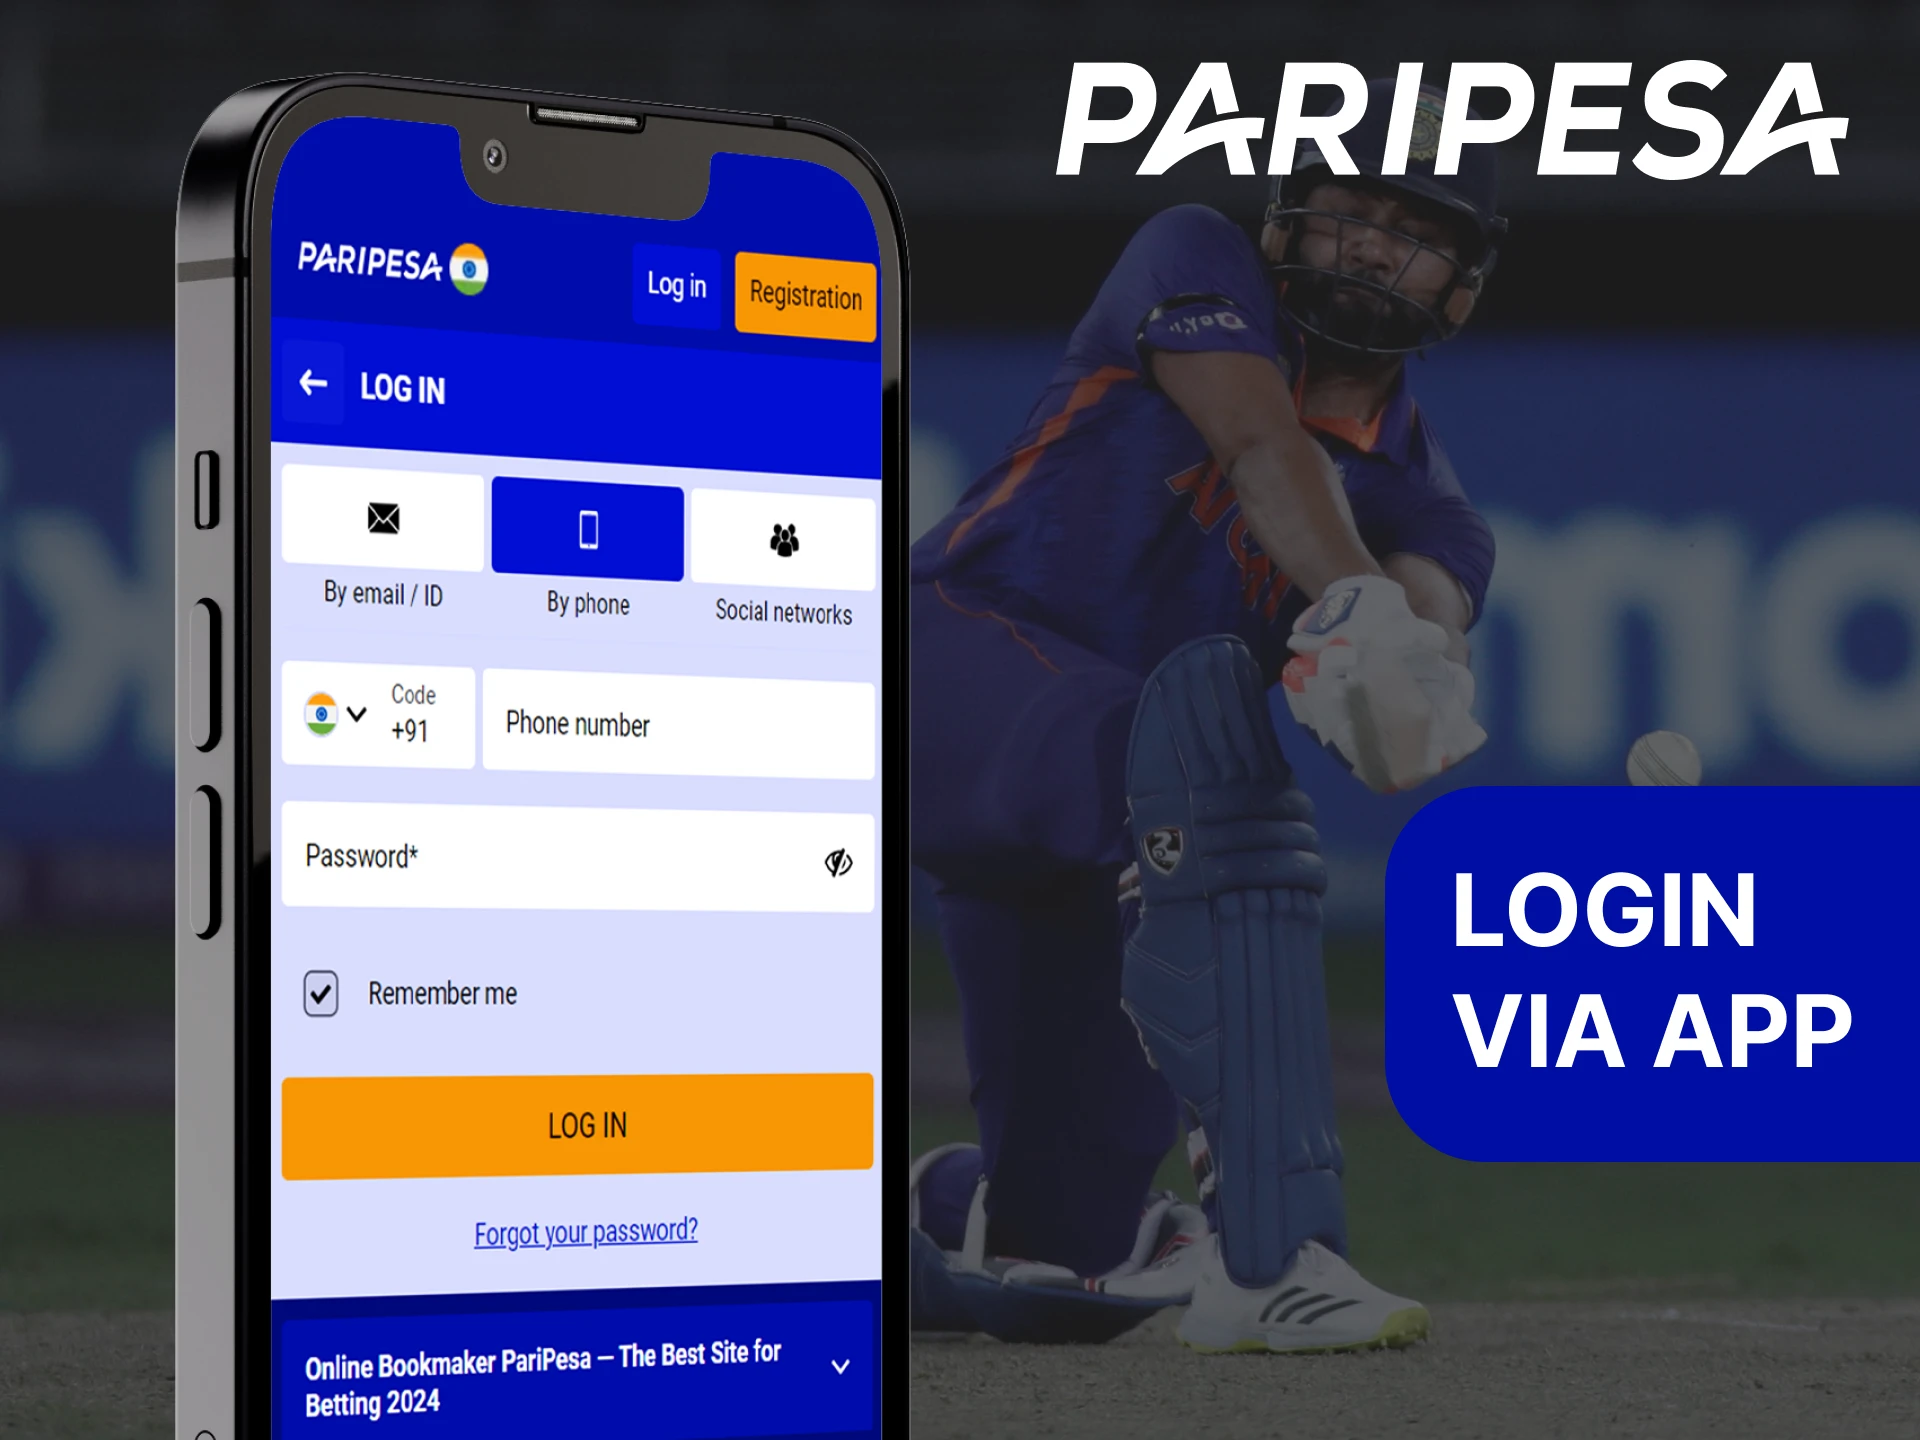 To place sports bets with Paripesa, you can use their mobile app, just log in.